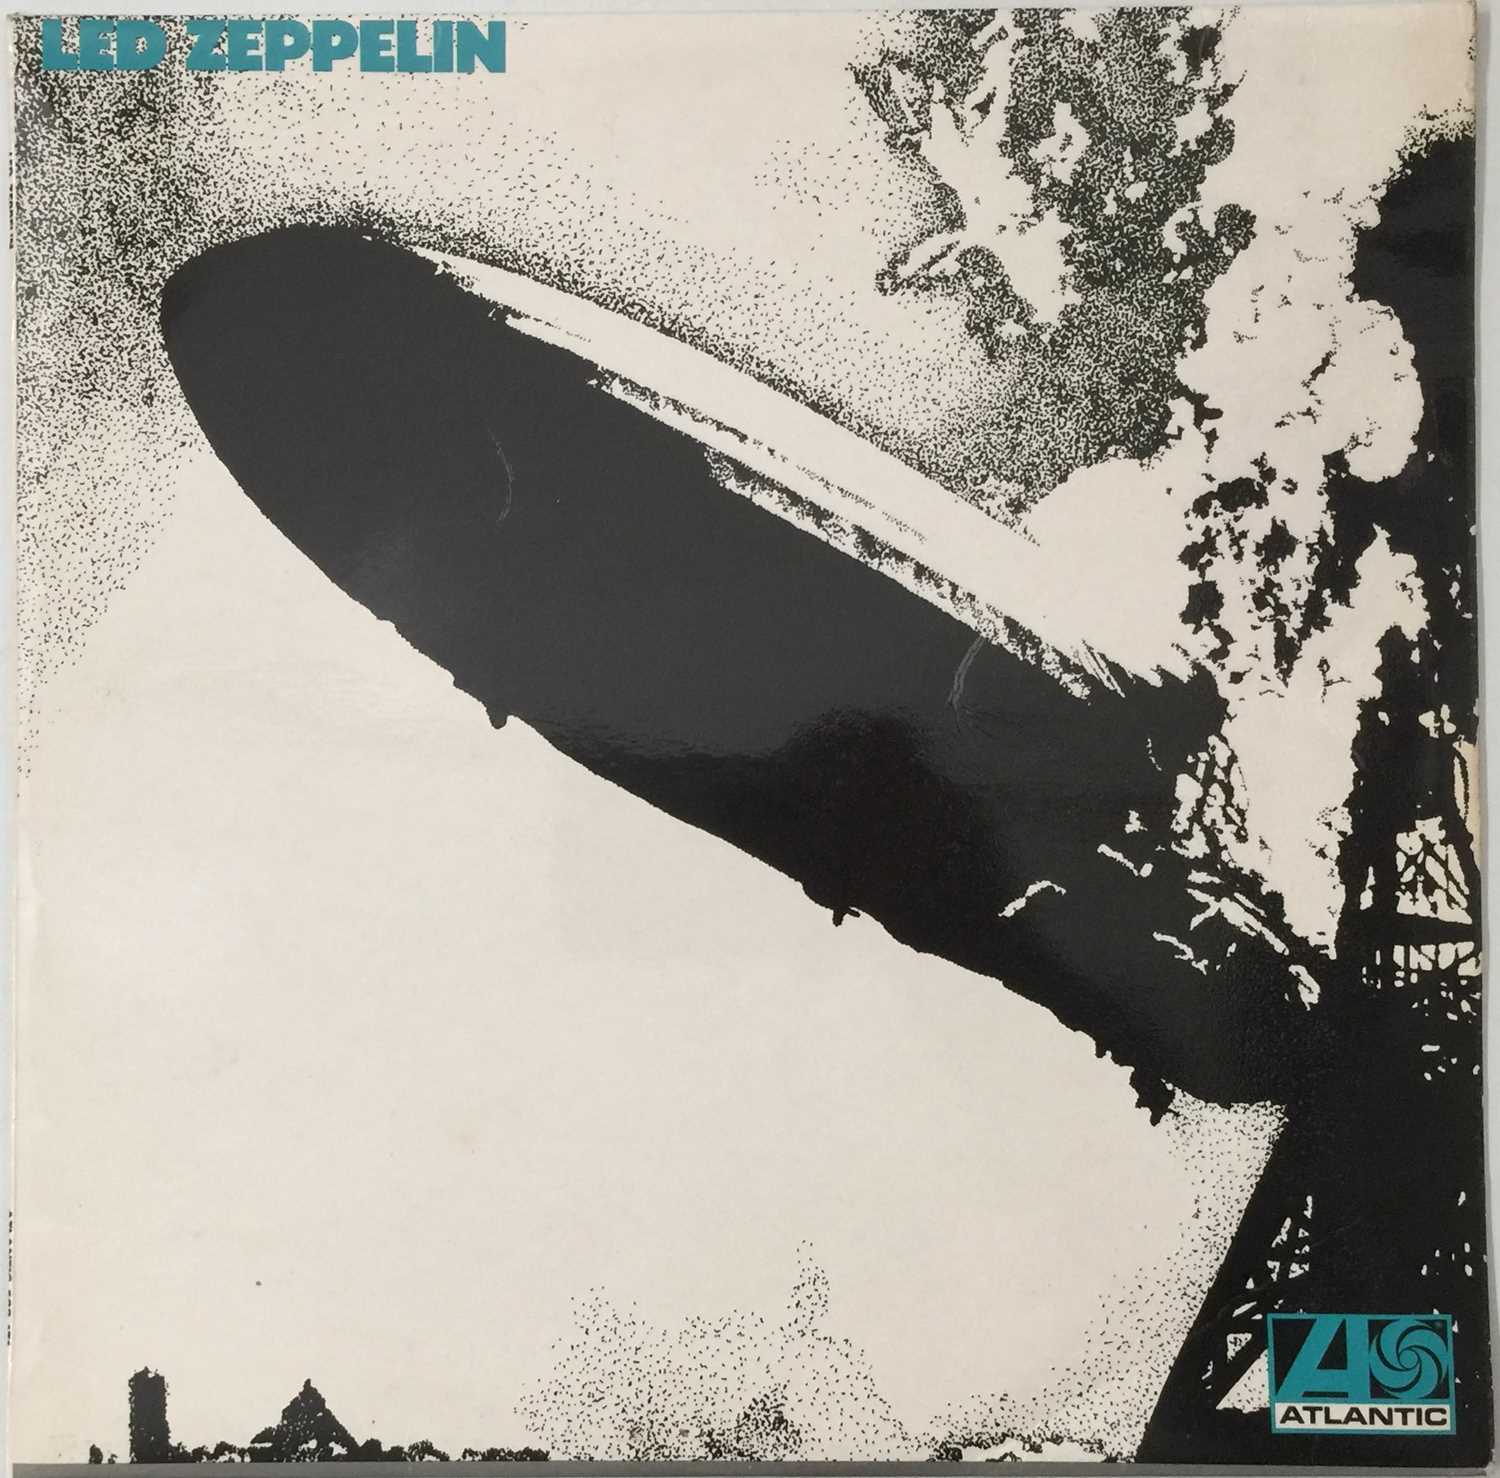 LED ZEPPELIN - 'I' LP (FIRST UK 'TURQUOISE' COPY - ATLANTIC 588171 - UNCORRECTED 8s) - Image 2 of 5